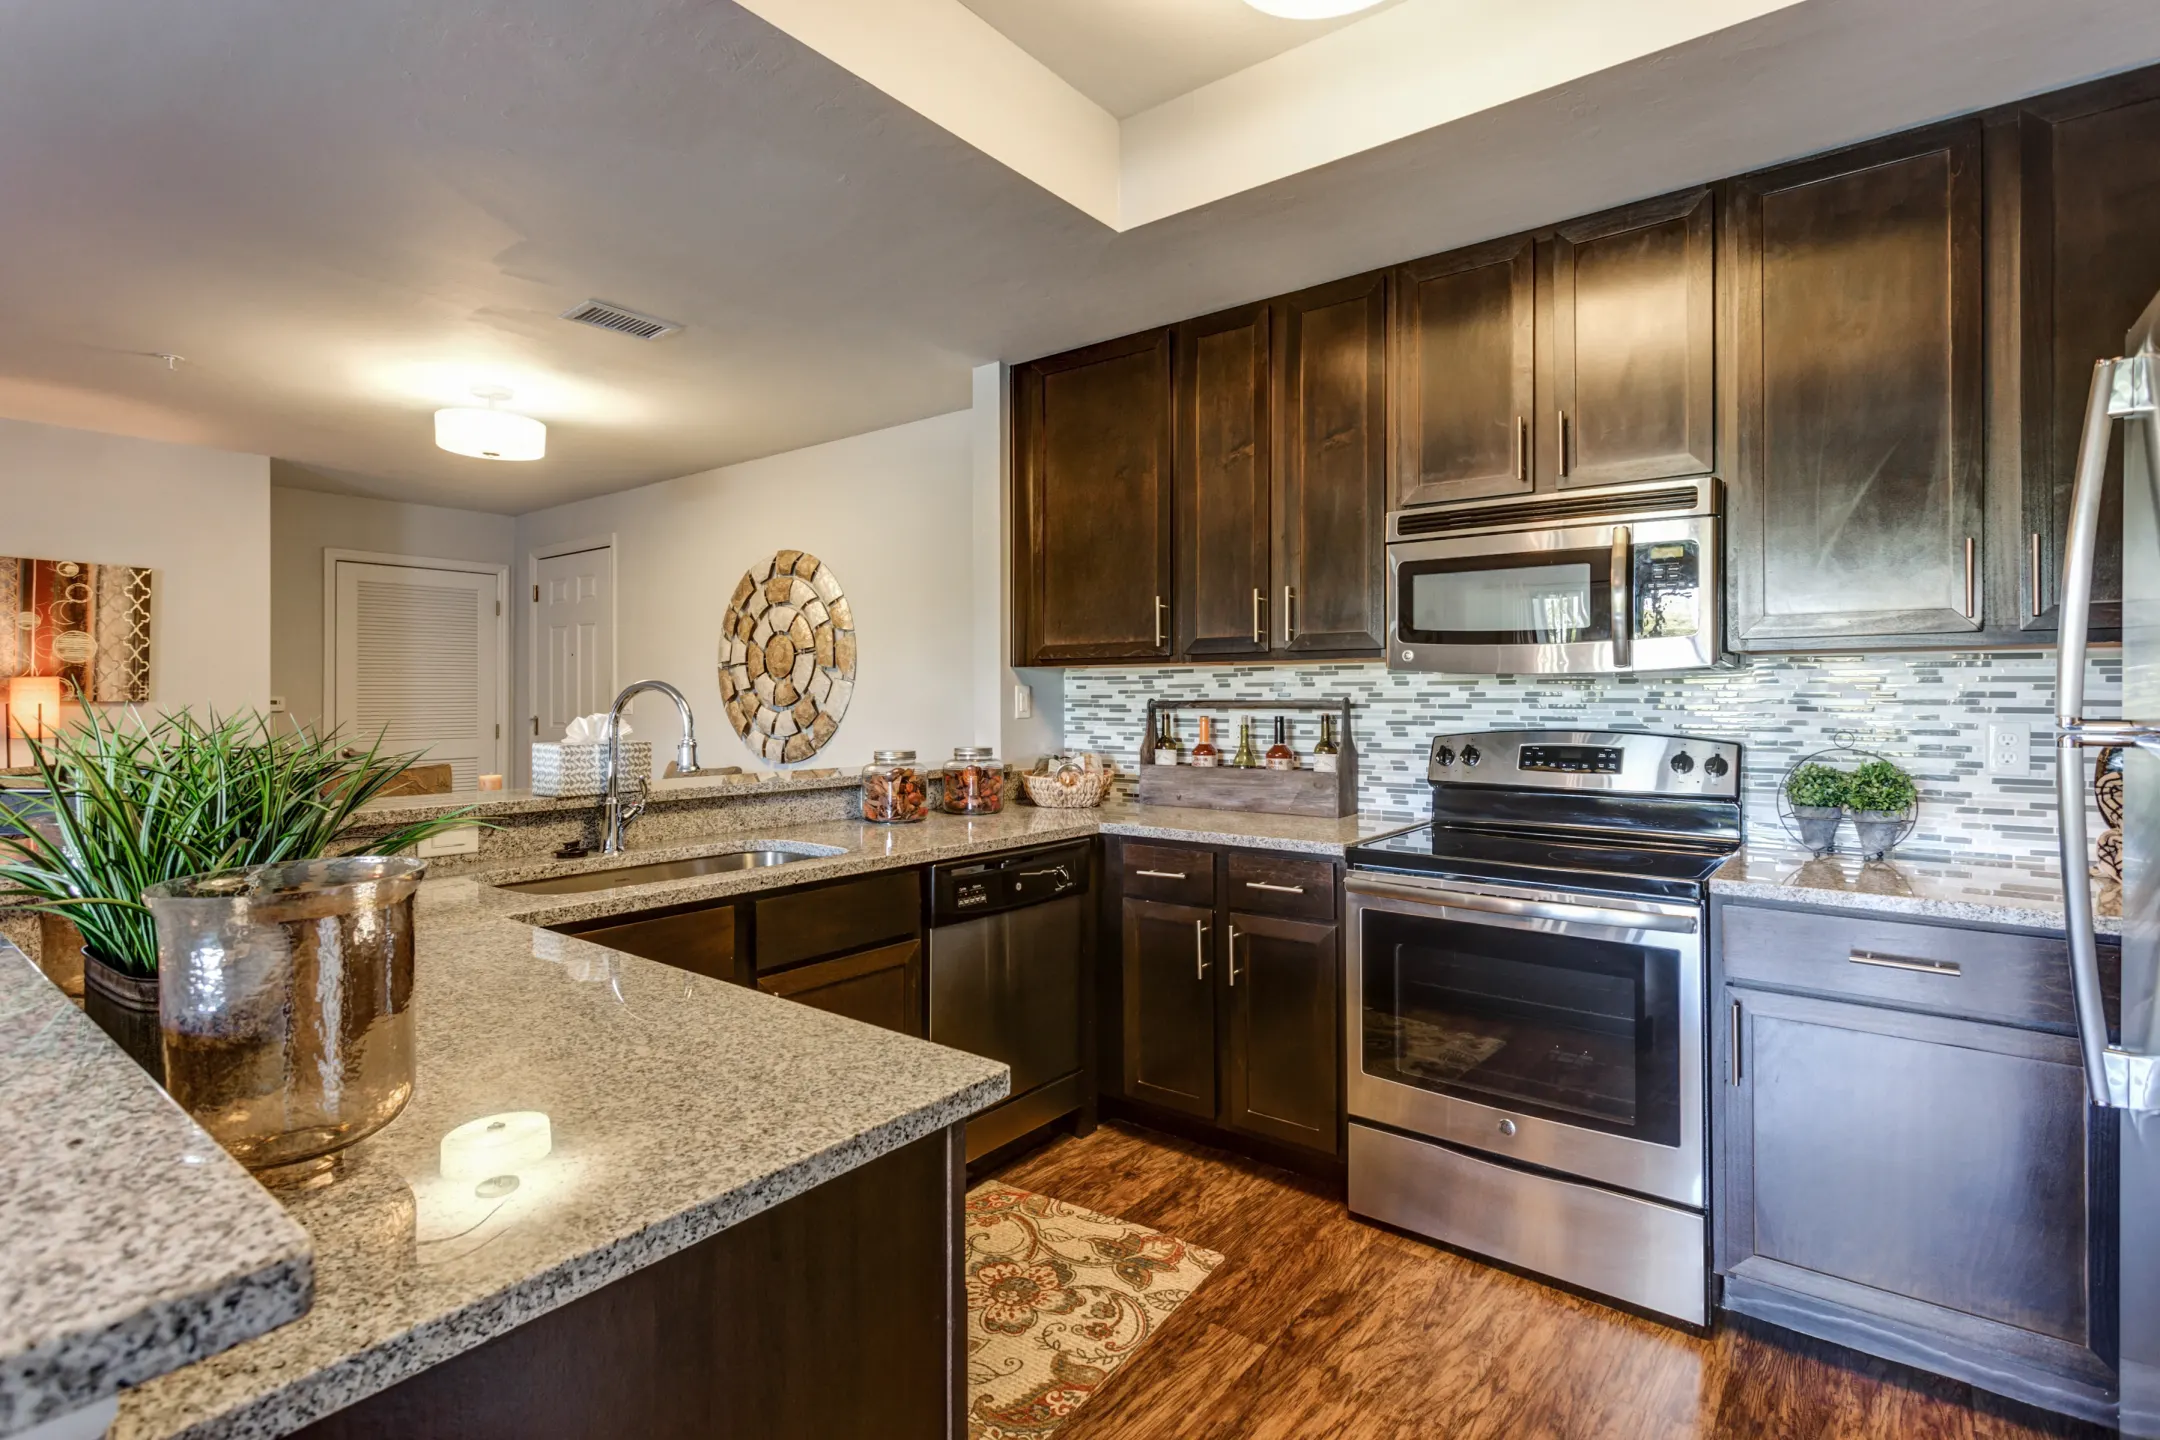 Kitchen - Channelside Contemporary Living Apartments - Fort Myers, FL